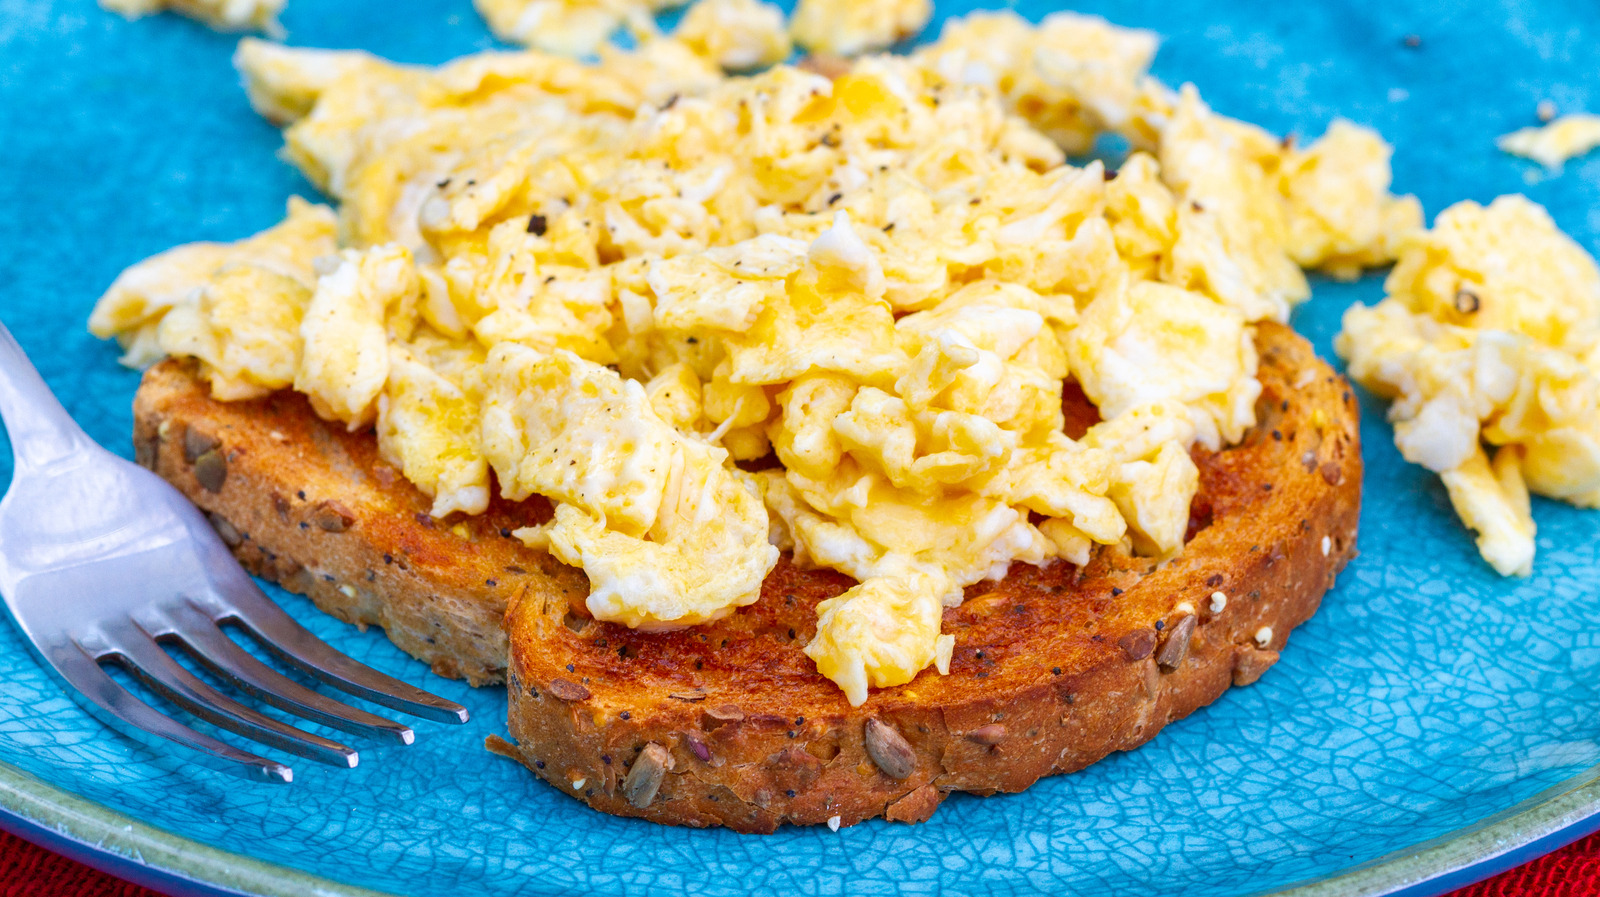 For the Best Scrambled Eggs, Cook Them In Brown Butter